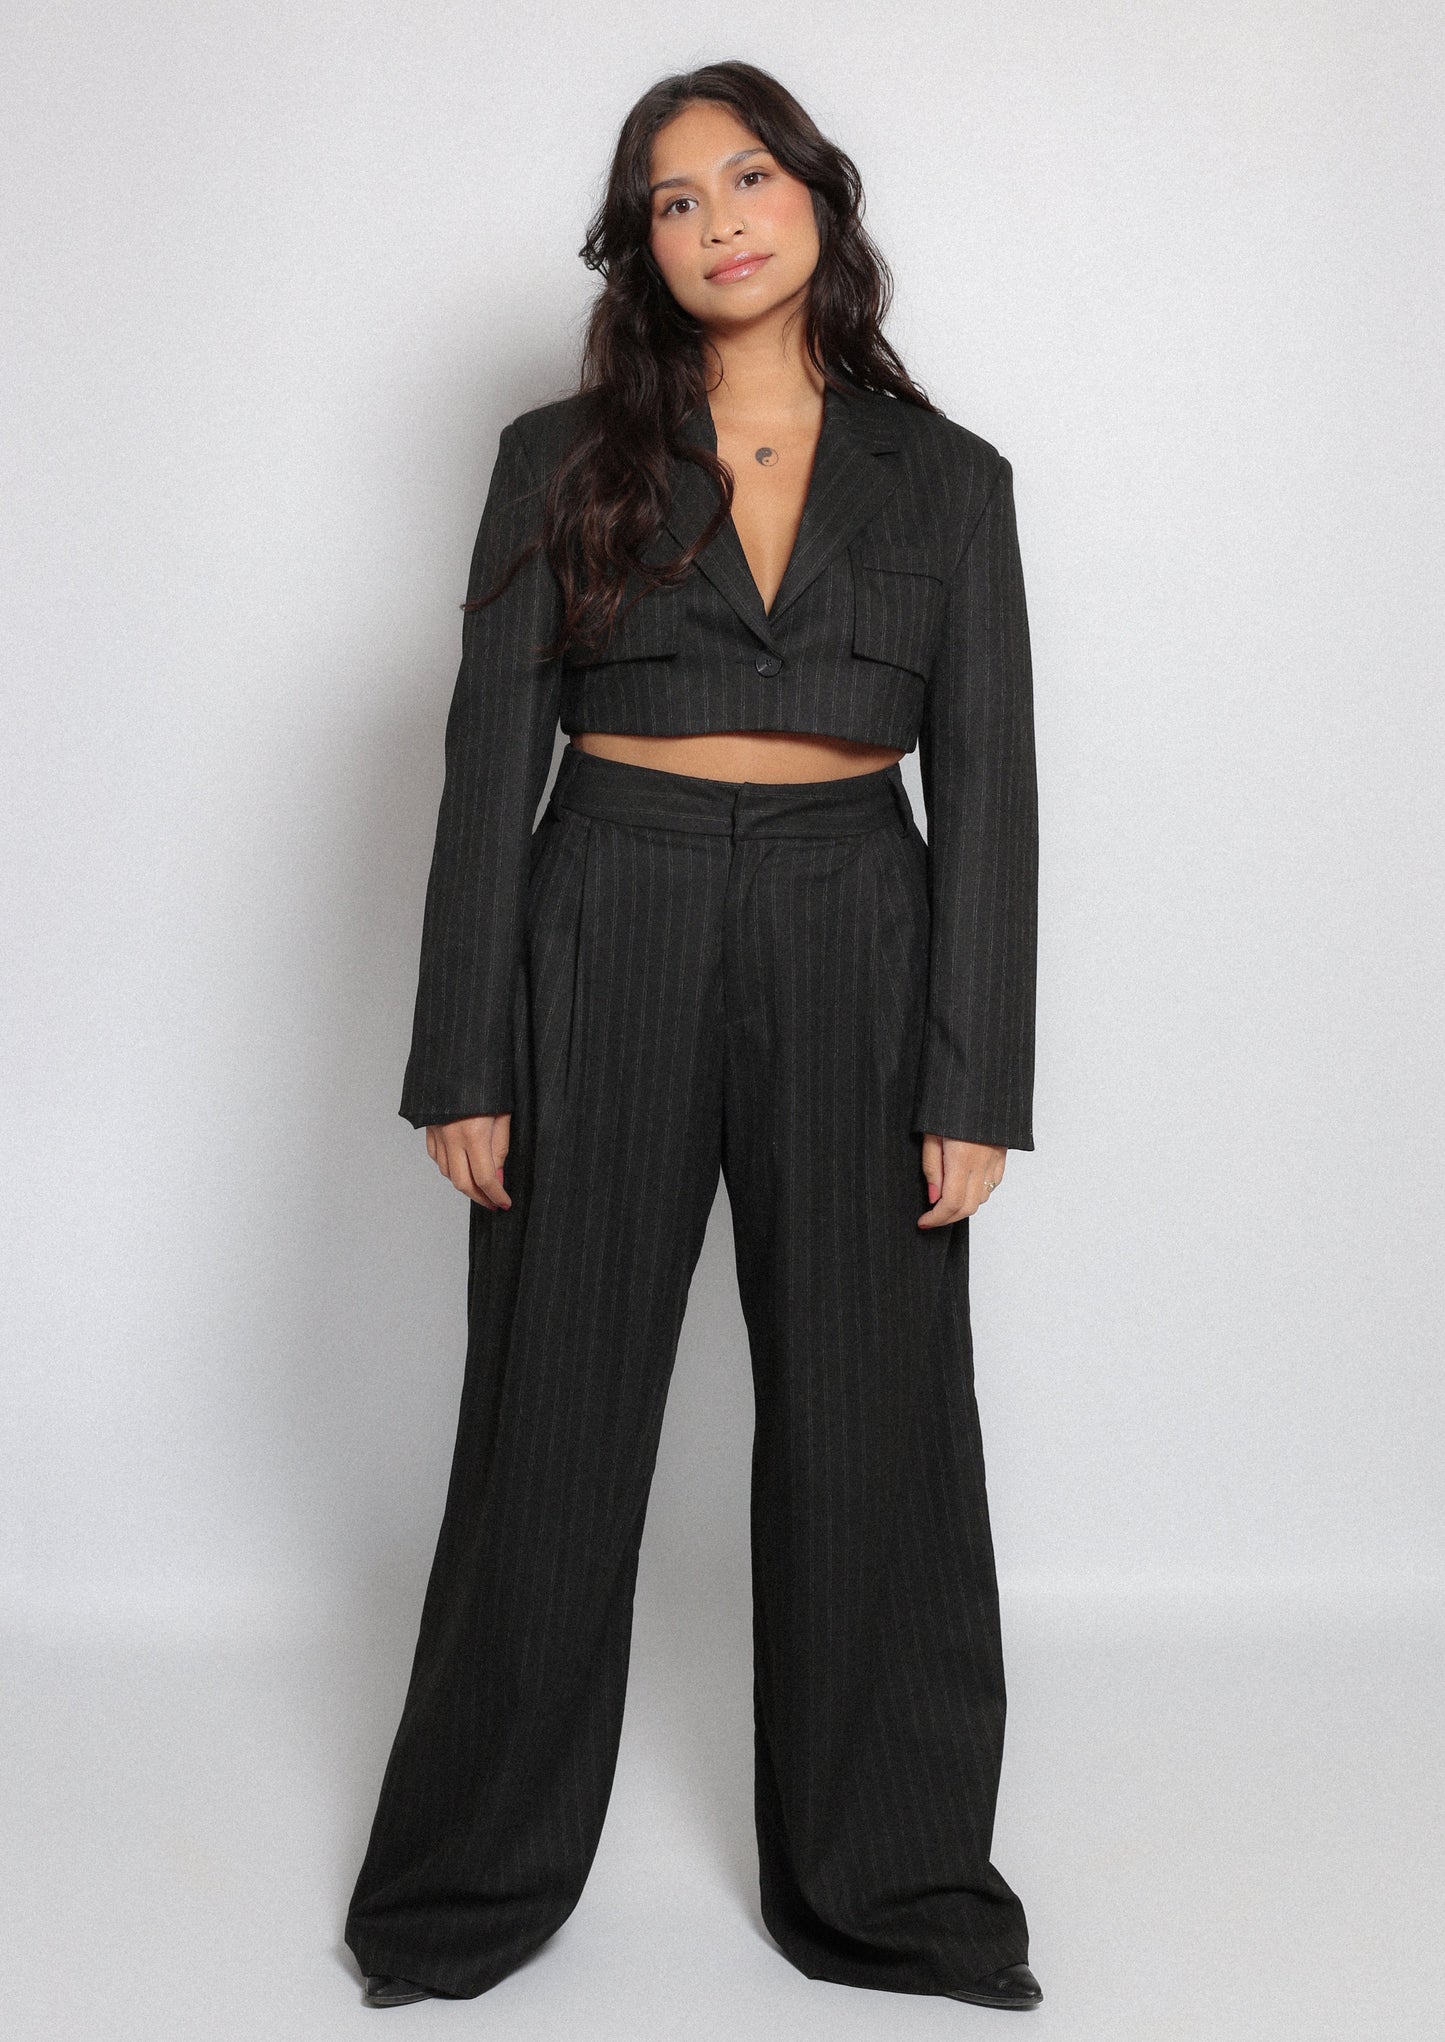 High-waisted striped trousers,Striped pants, Women's fashion, your lookbook, slow fashion,Chic trousers,Fashionable pants, trendy bottoms, Versatile trousers, timeless style